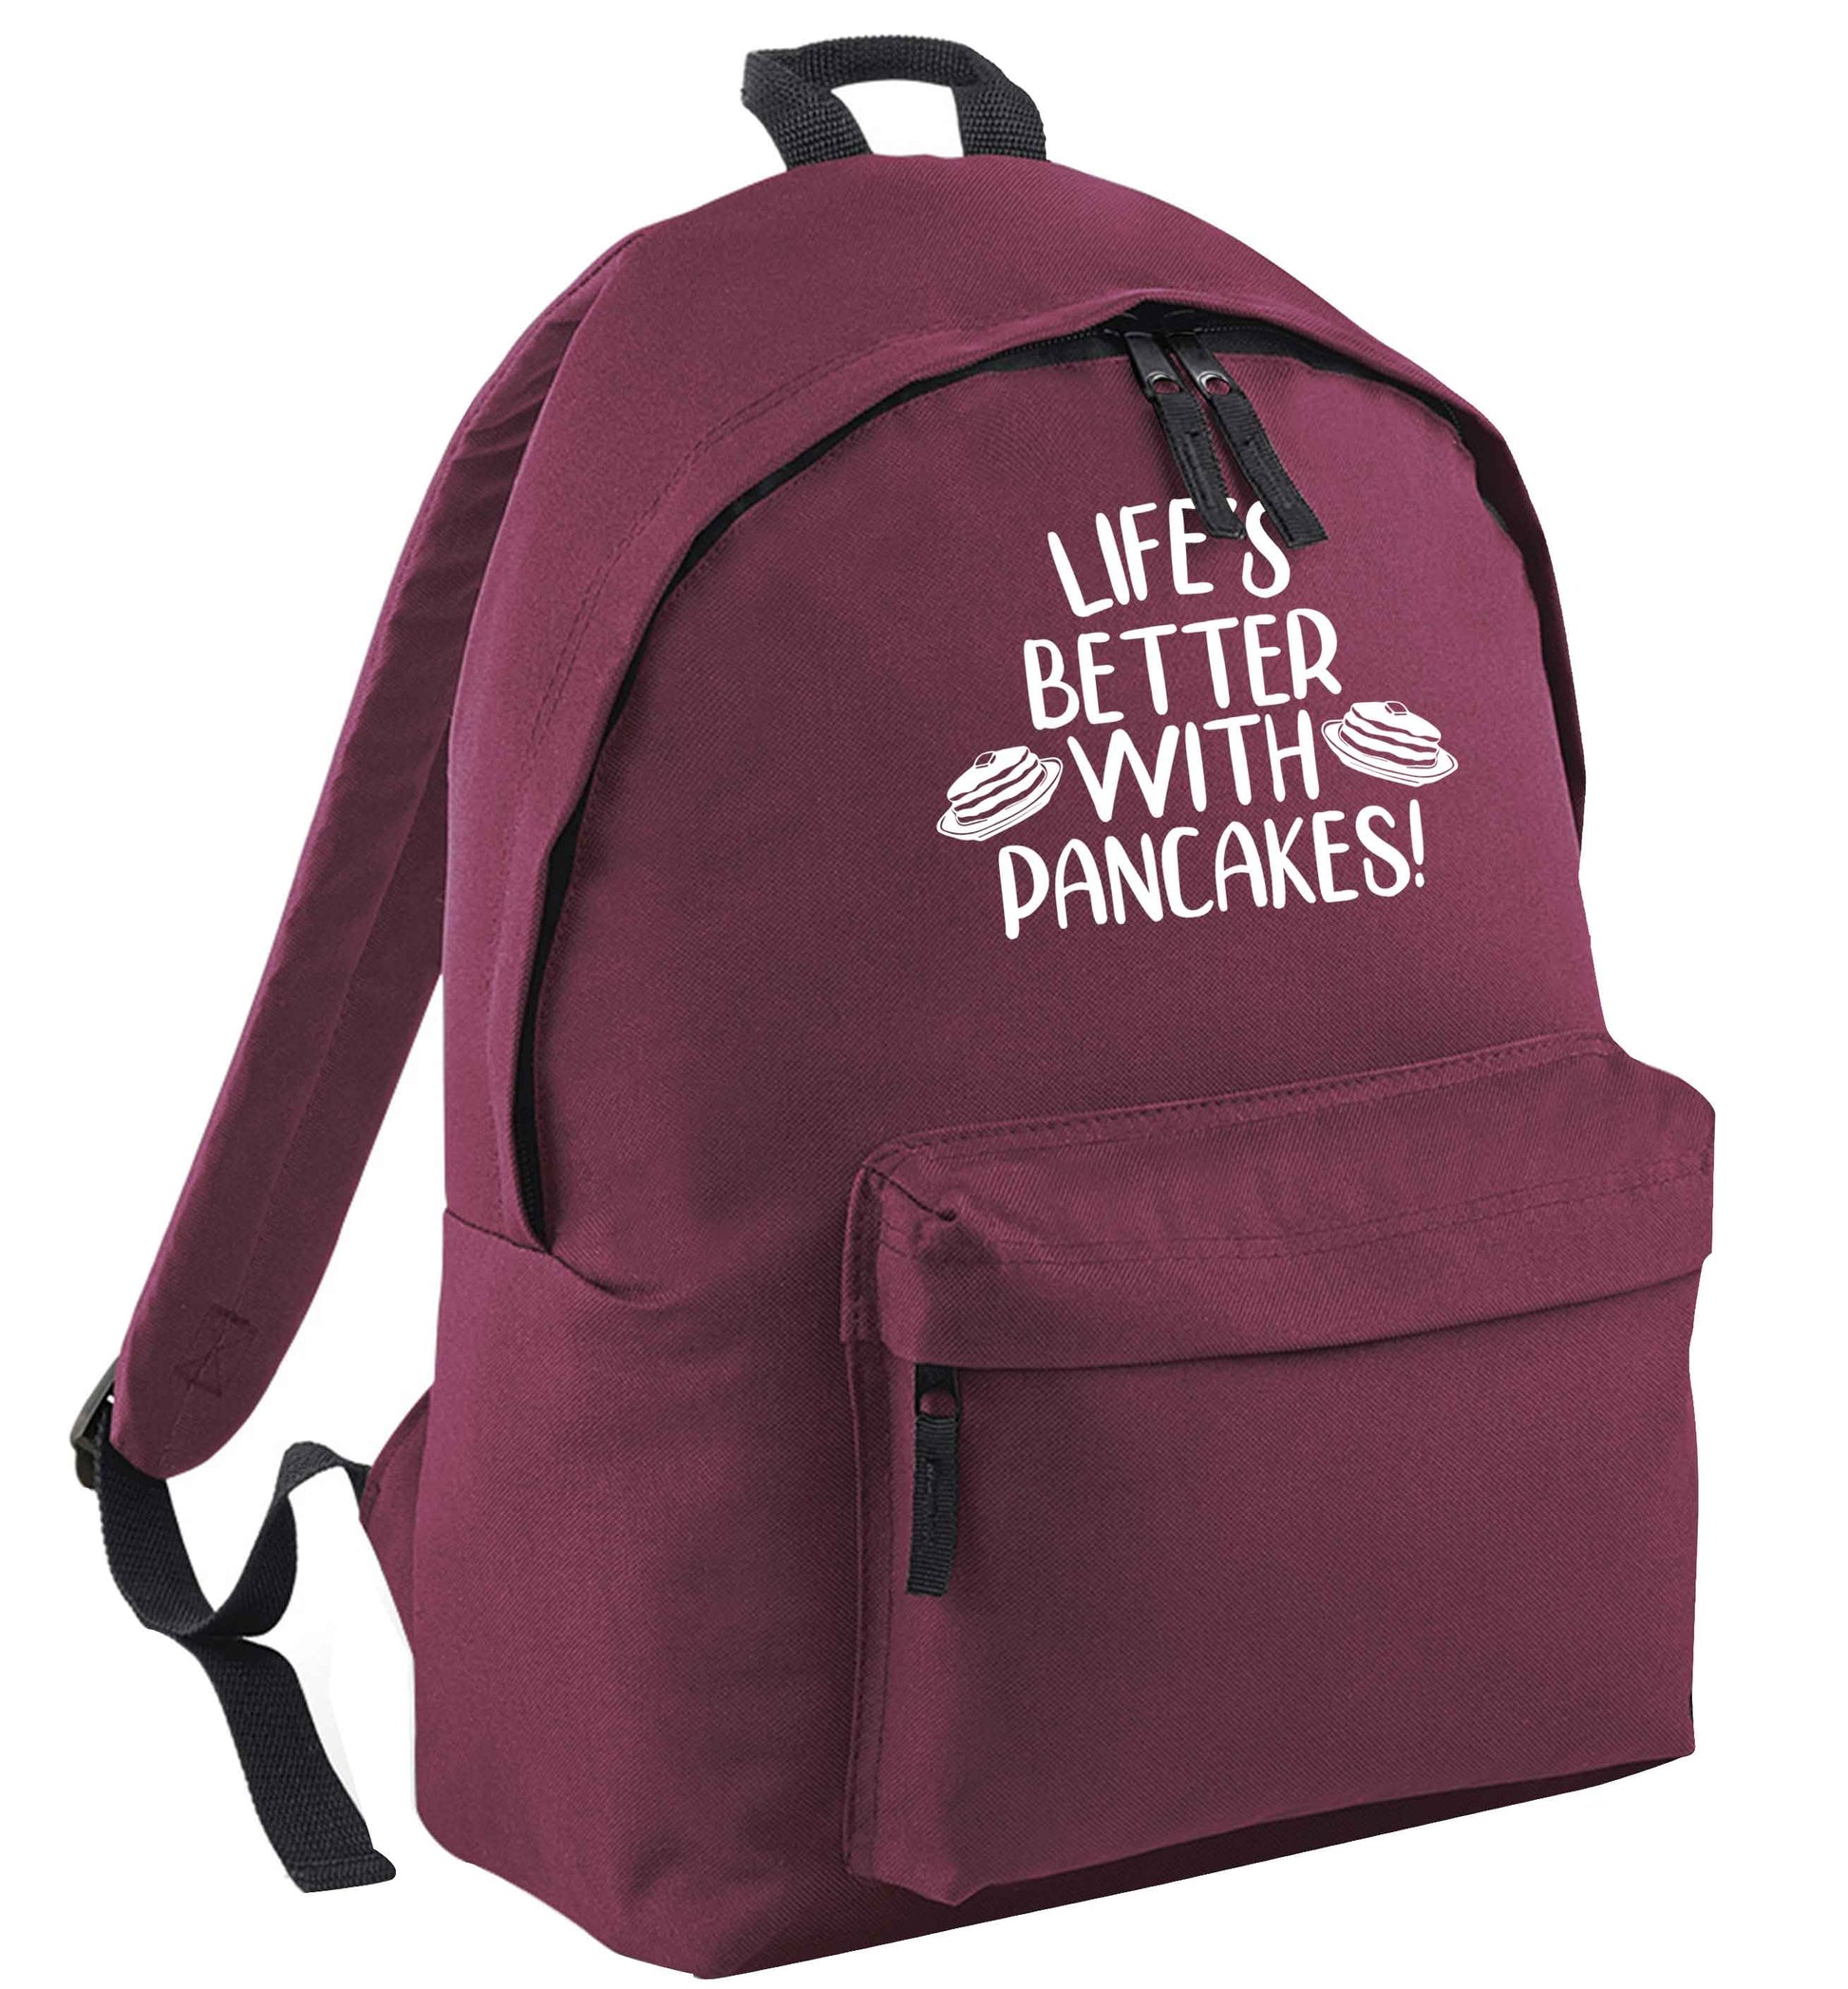 Life's better with pancakes black adults backpack